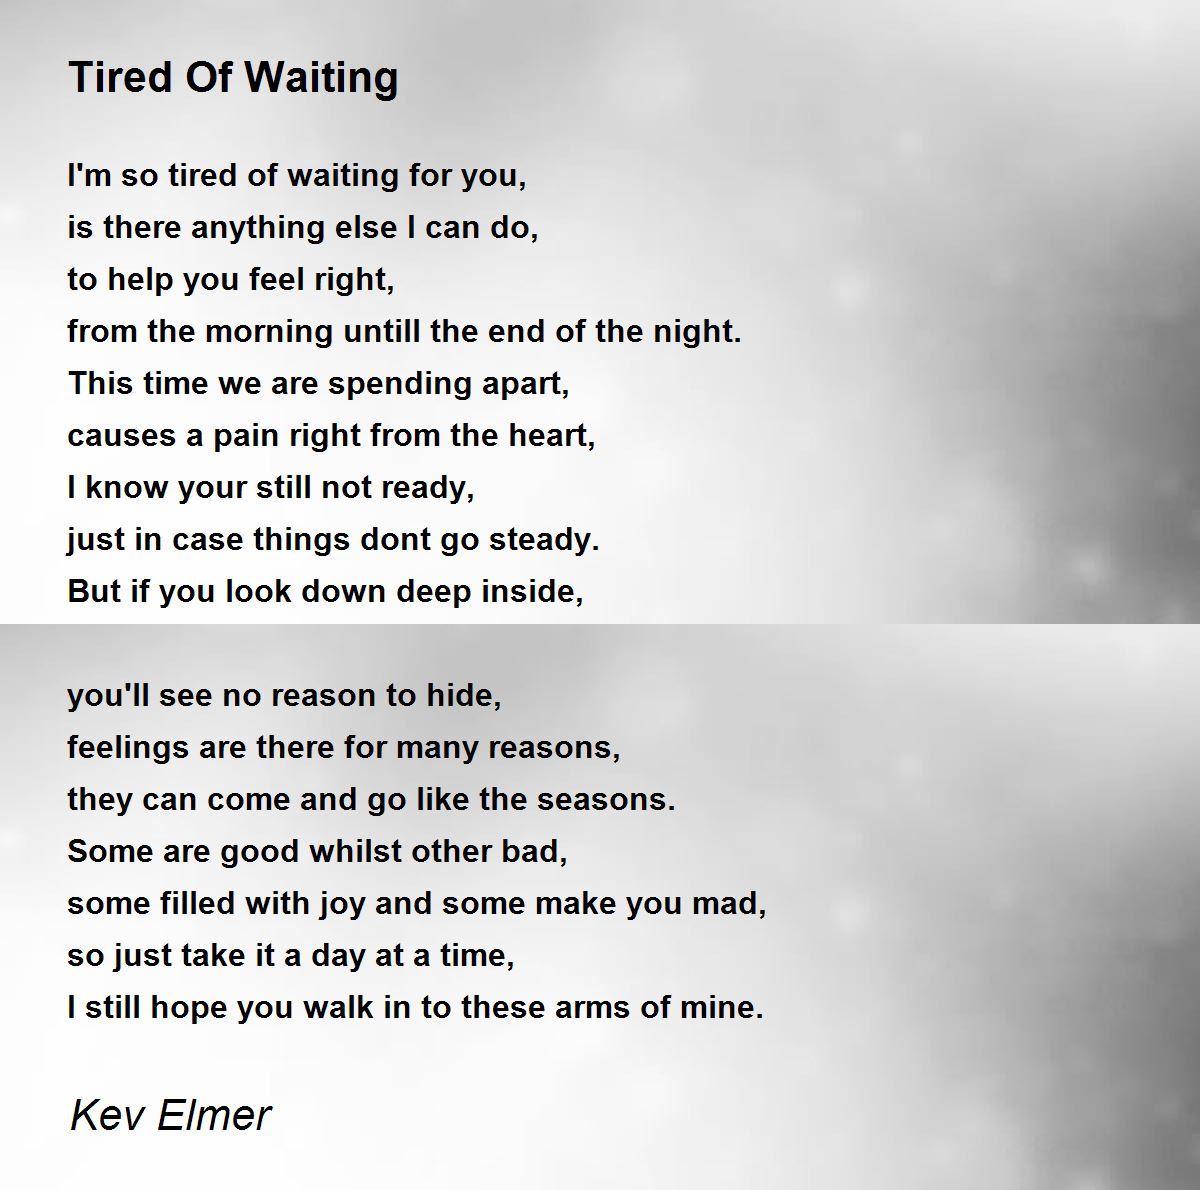 Tired Of Waiting - Tired Of Waiting Poem by Kev Elmer